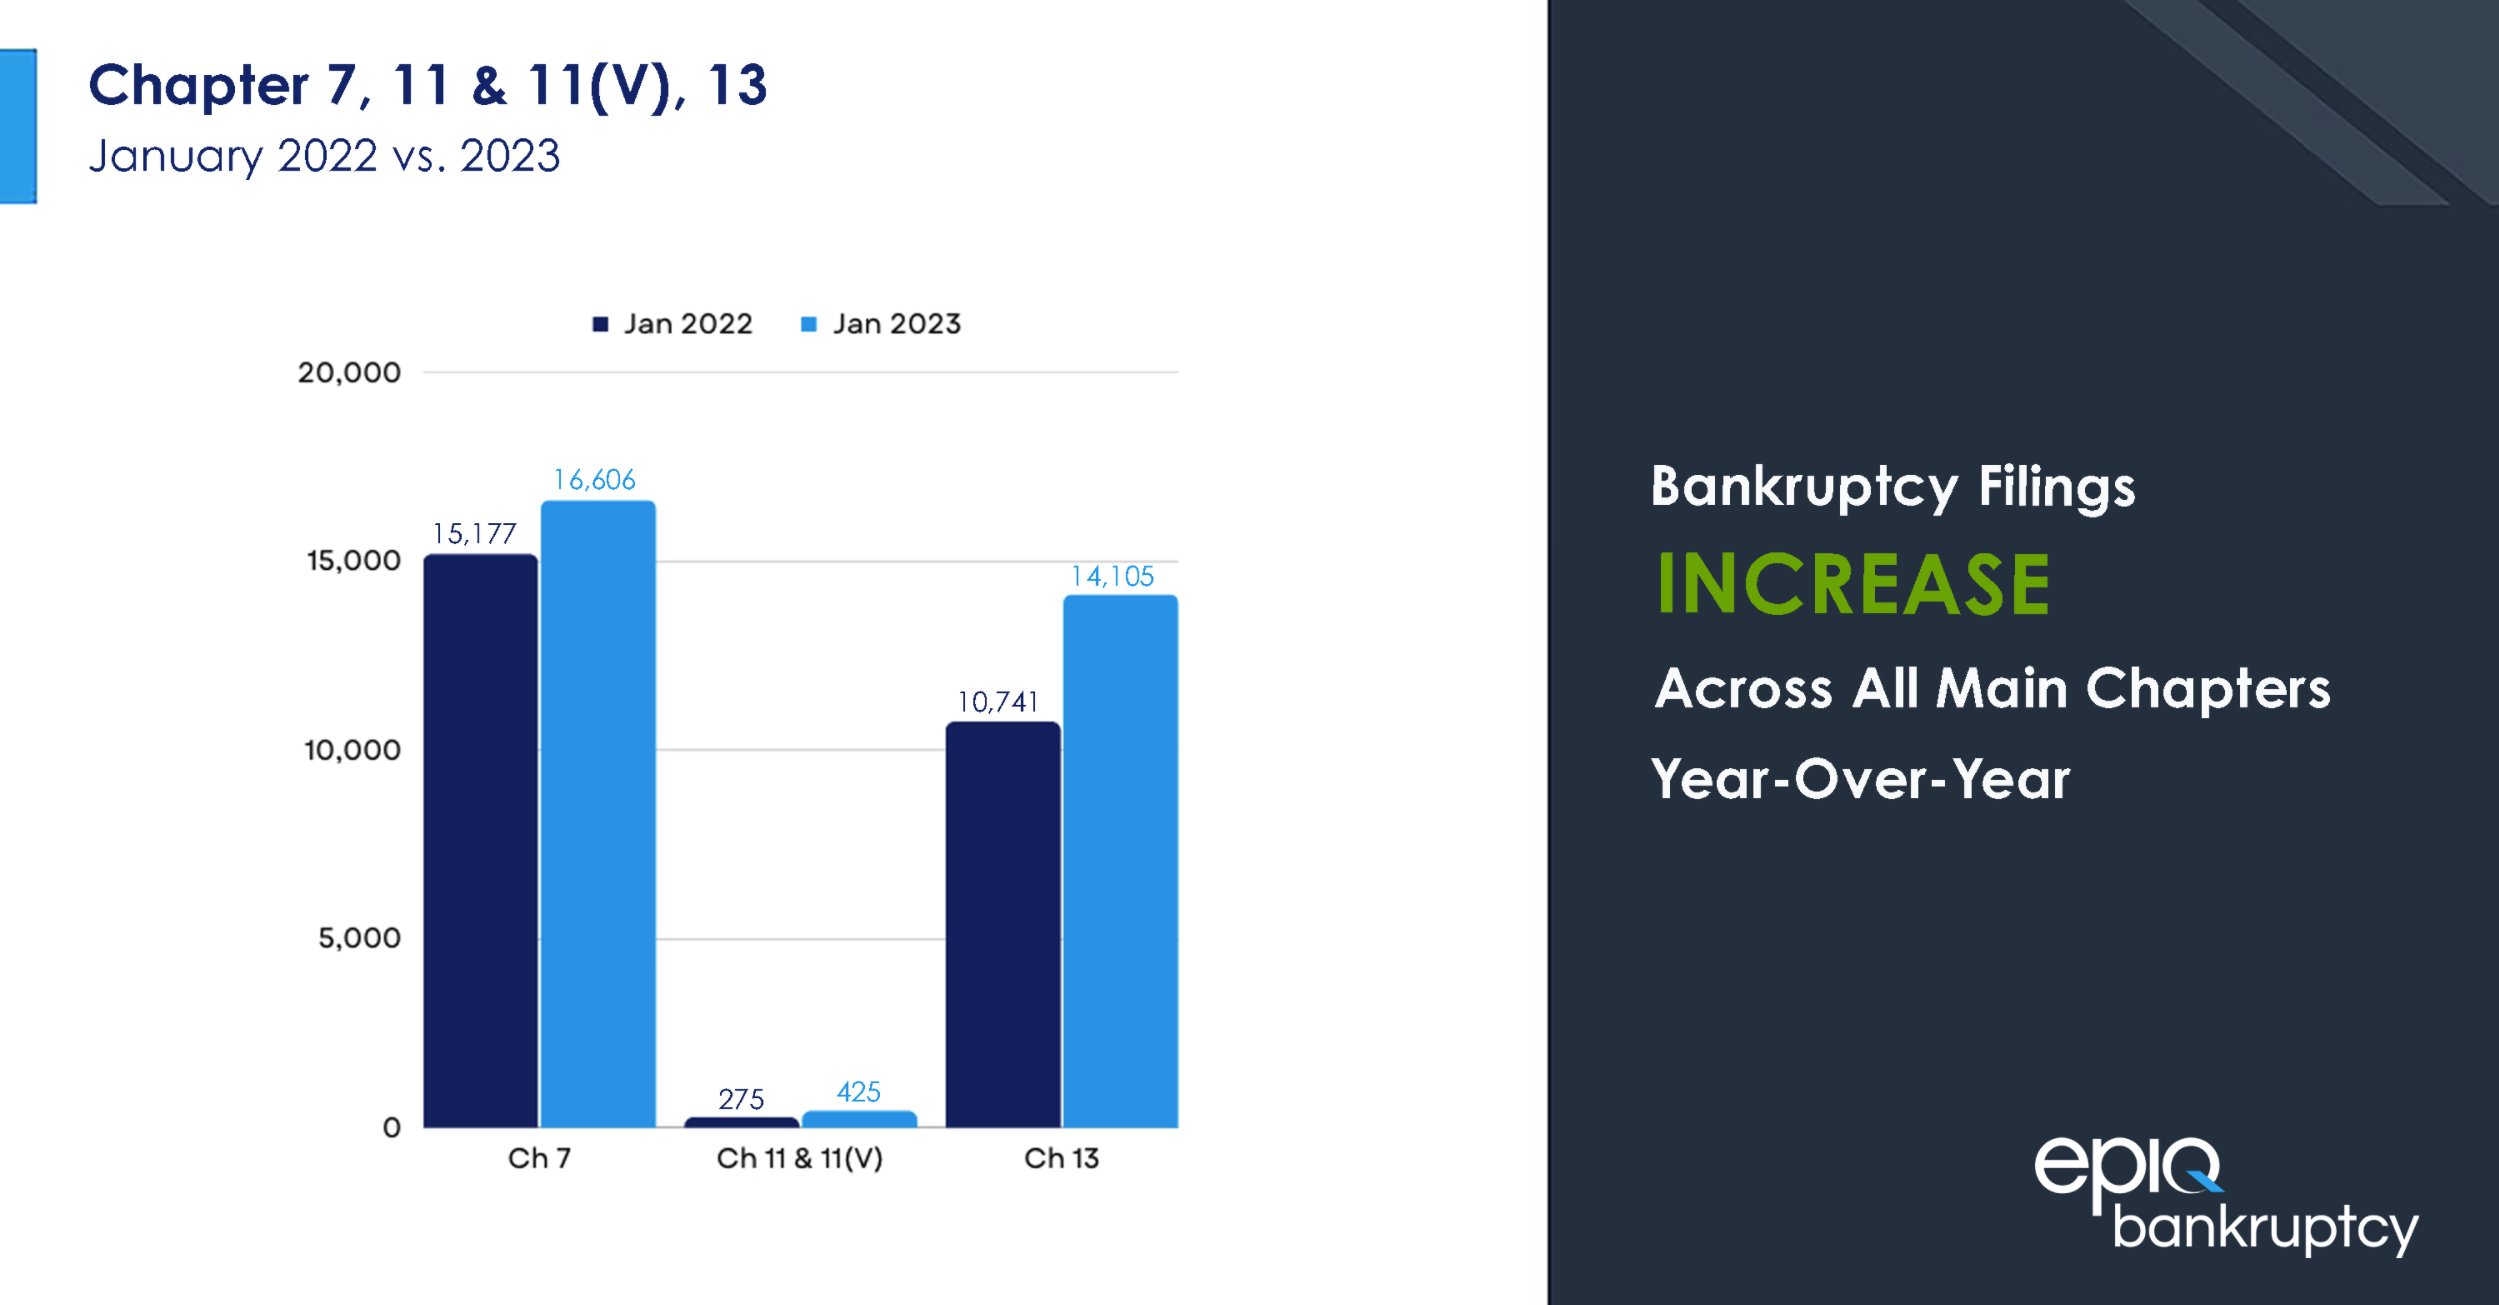 January Year-over-year Bankruptcy New Filings Increase Across All Main Chapters